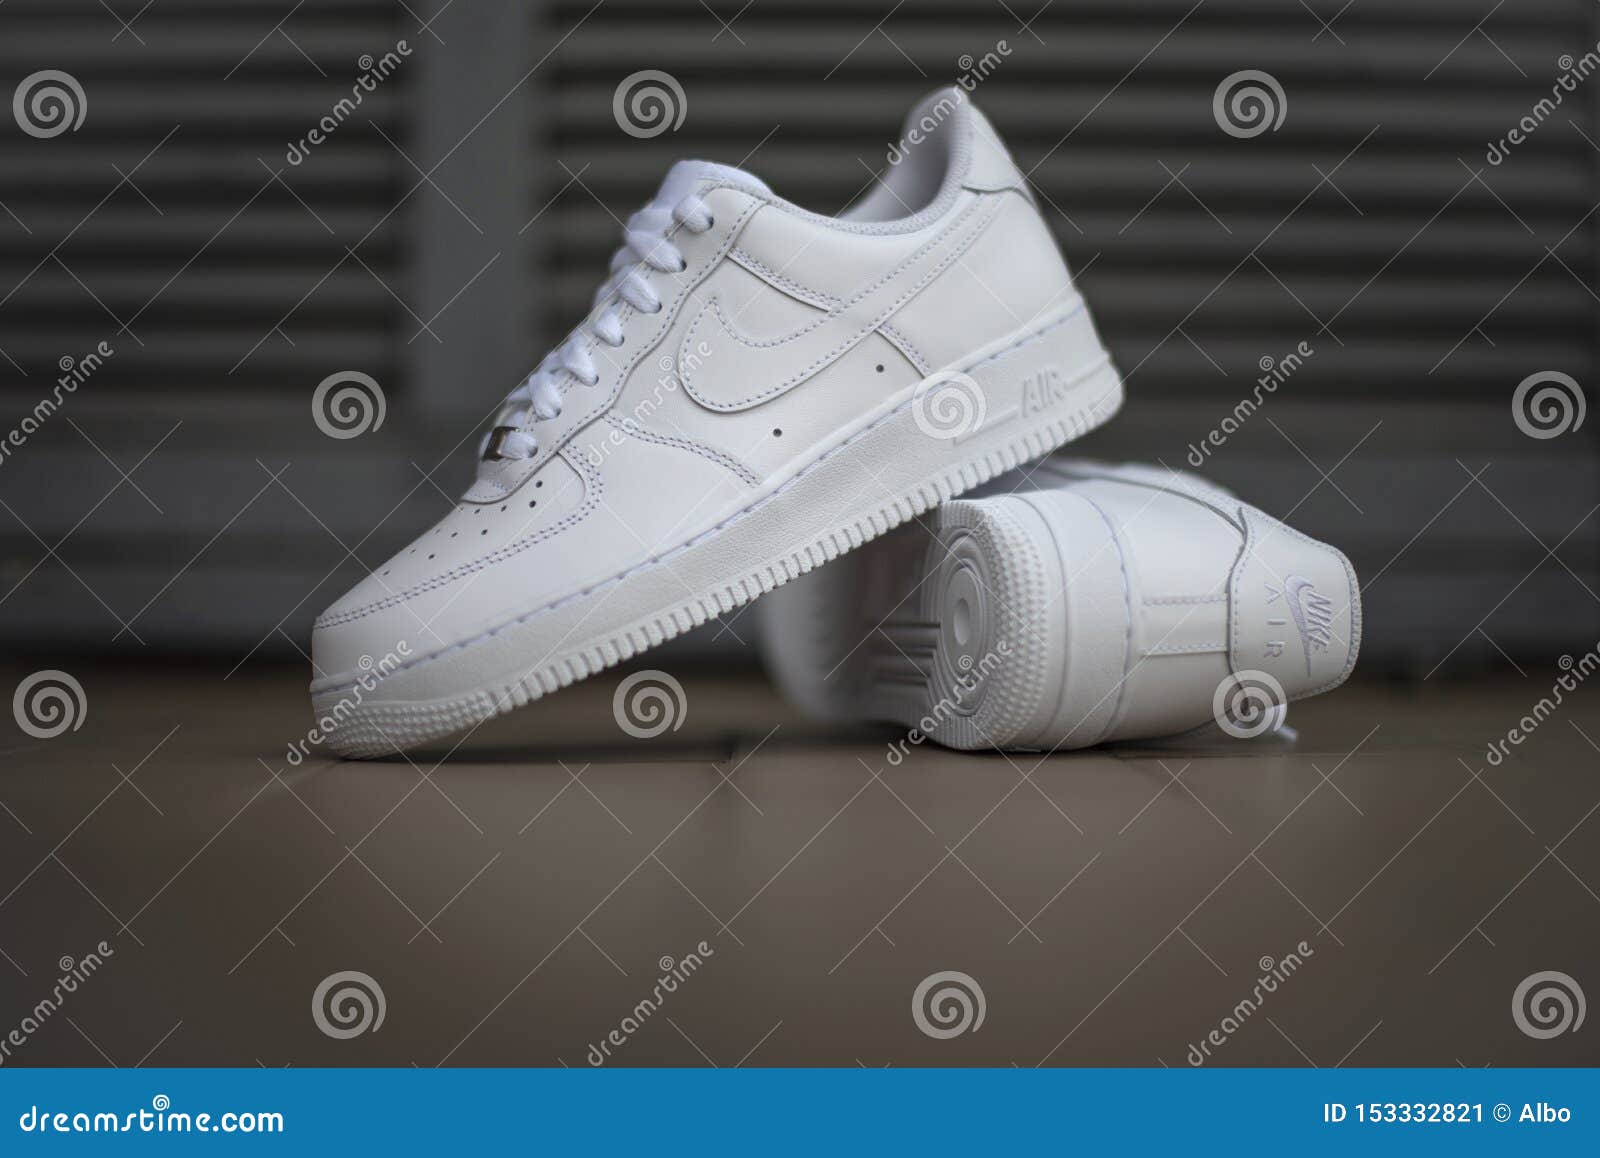 where are nike air force 1 in stock